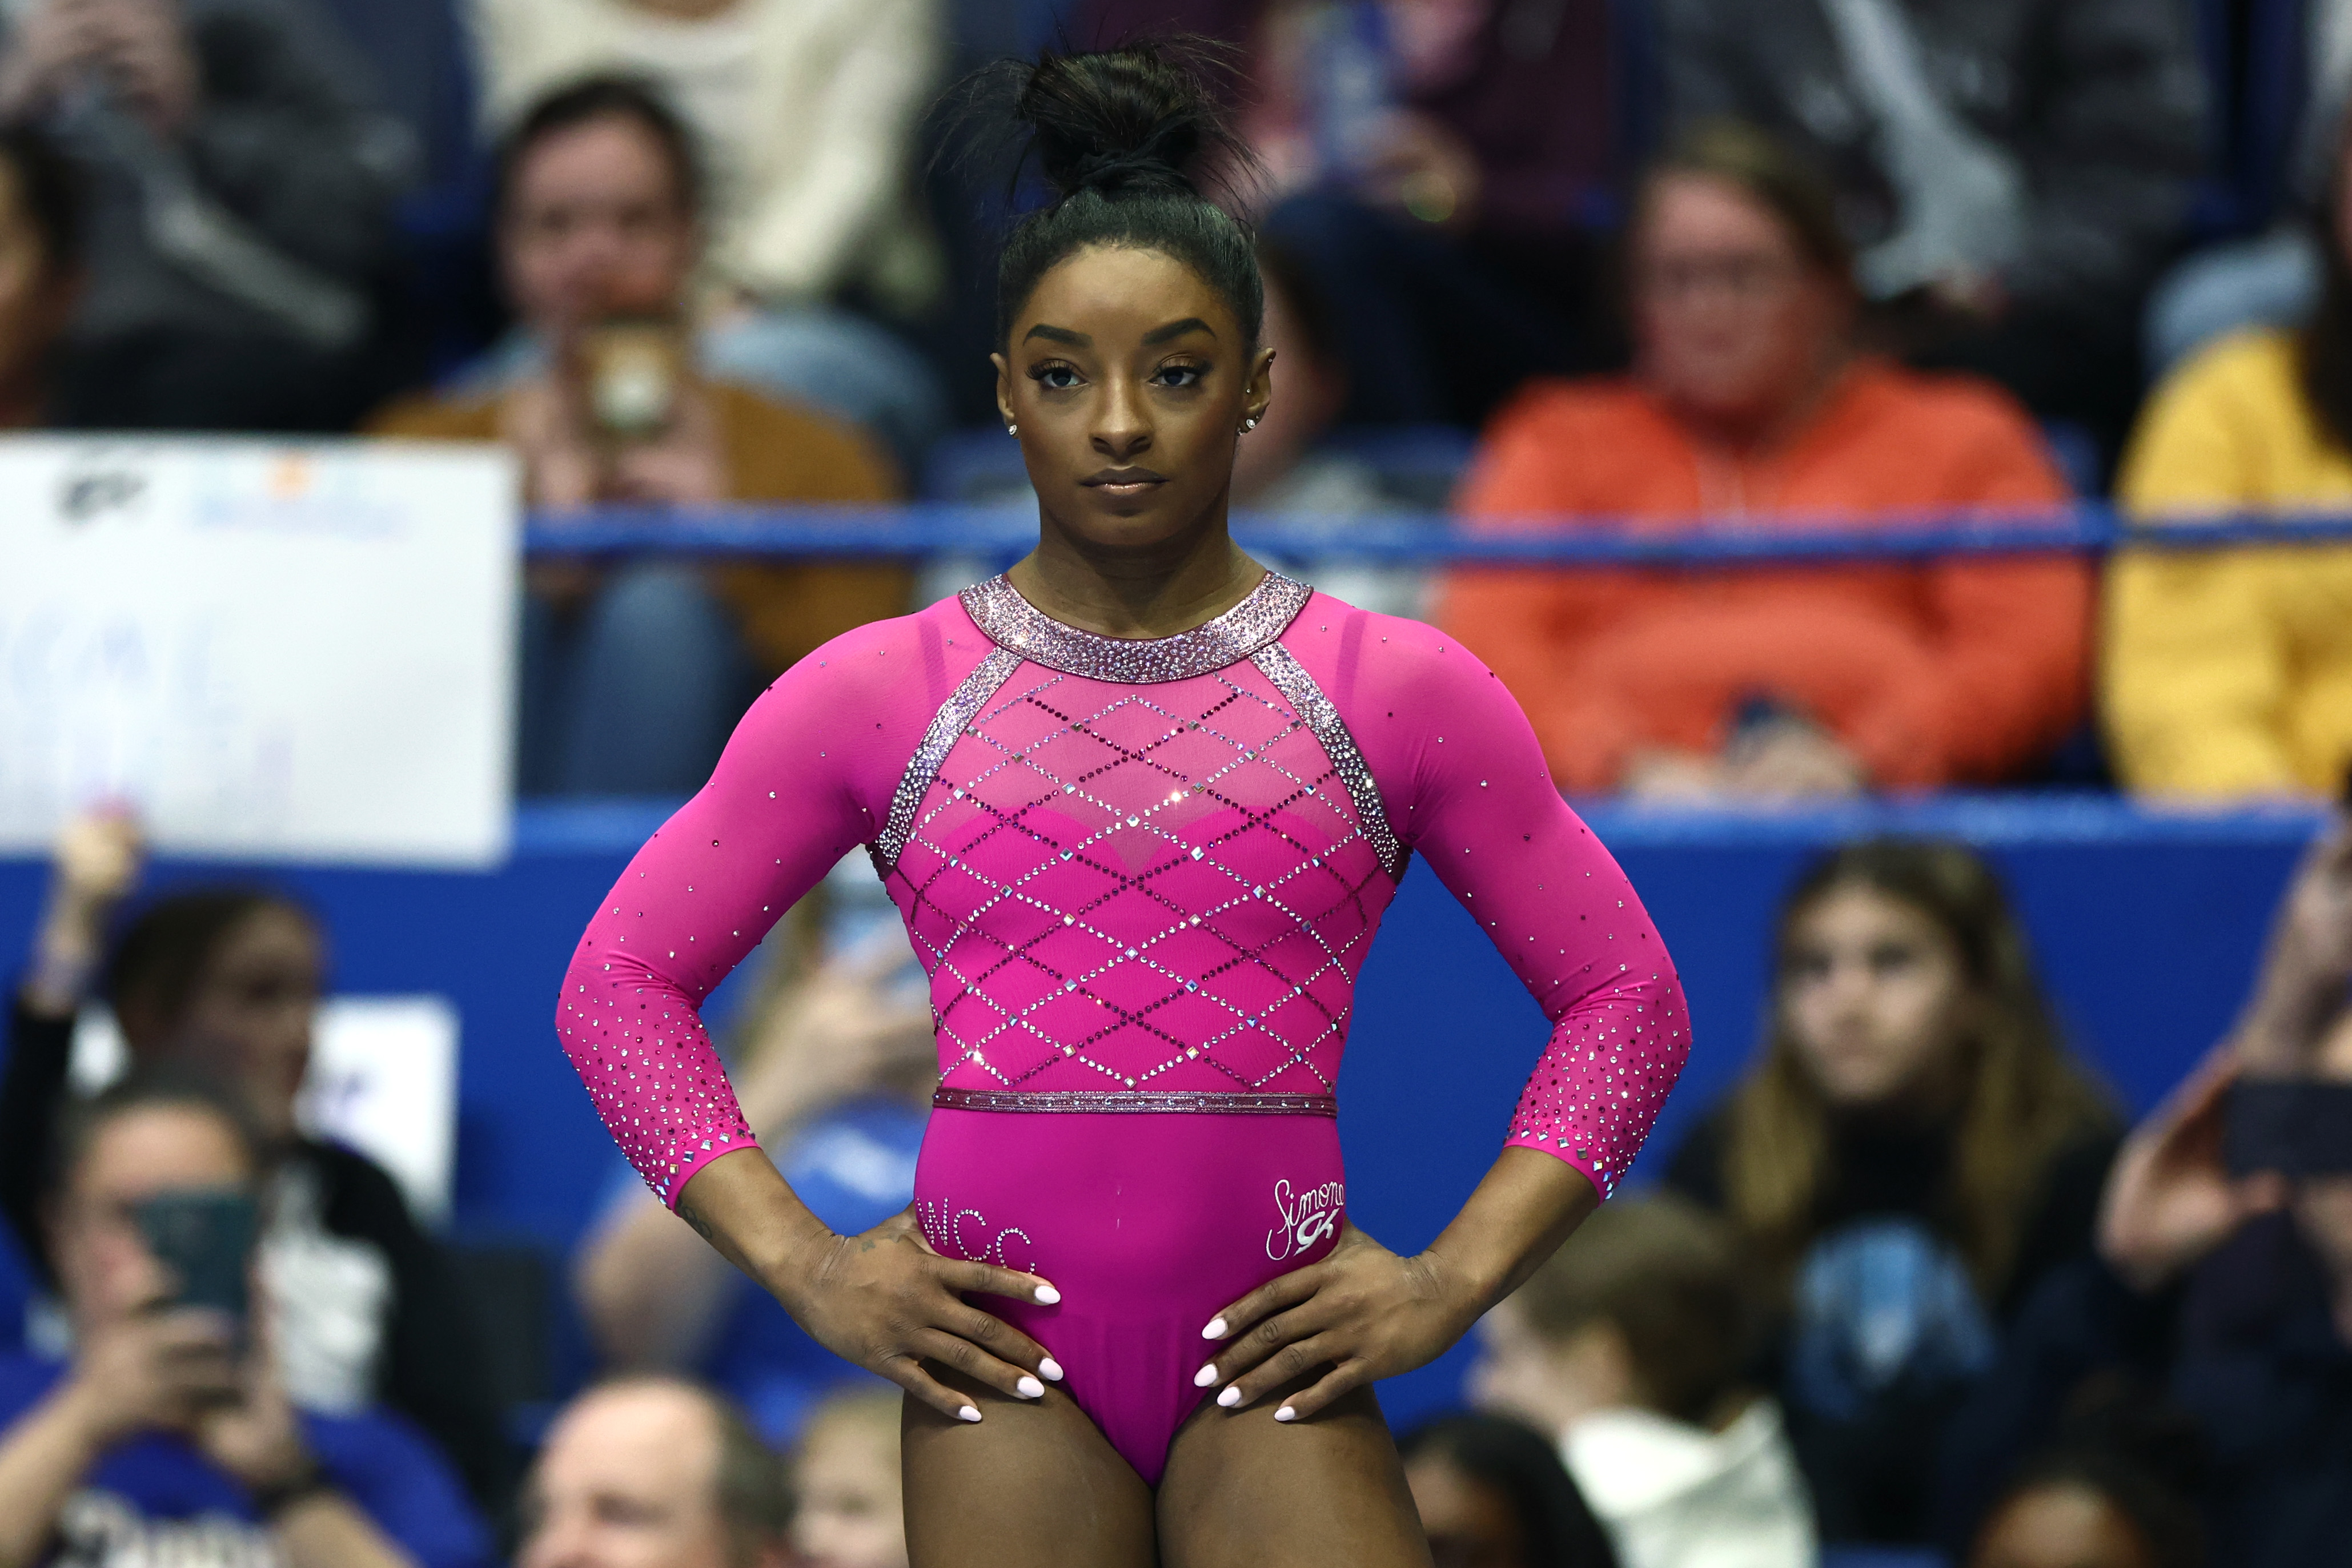 Simone Biles shines in return while Gabby Douglas scratches after a
shaky start at the U.S. Classic